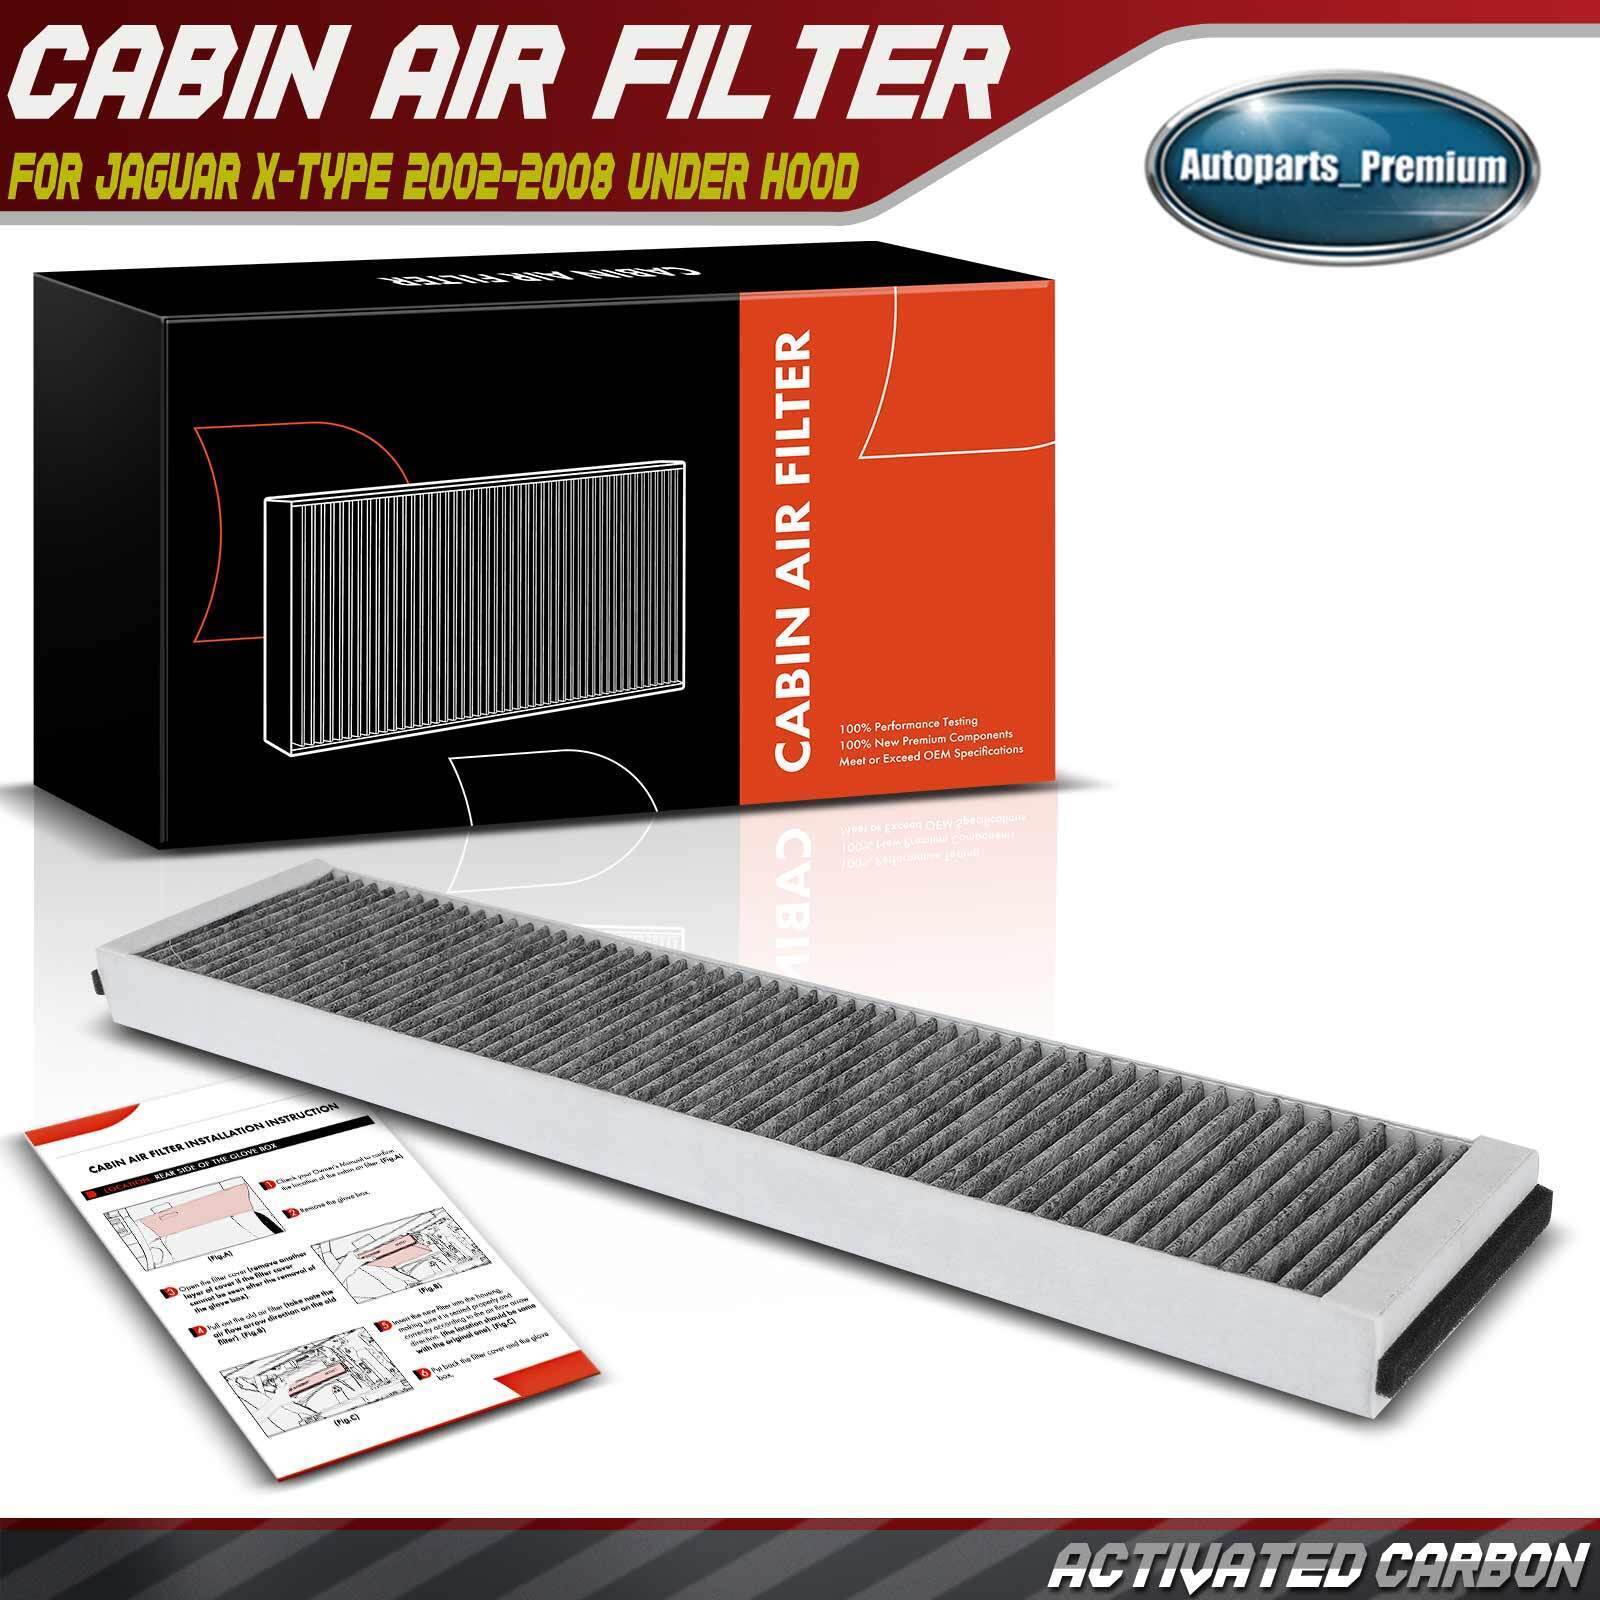 Cabin Air Filter with Activated Carbon for Jaguar X-Type 2002-2008 Under Hood